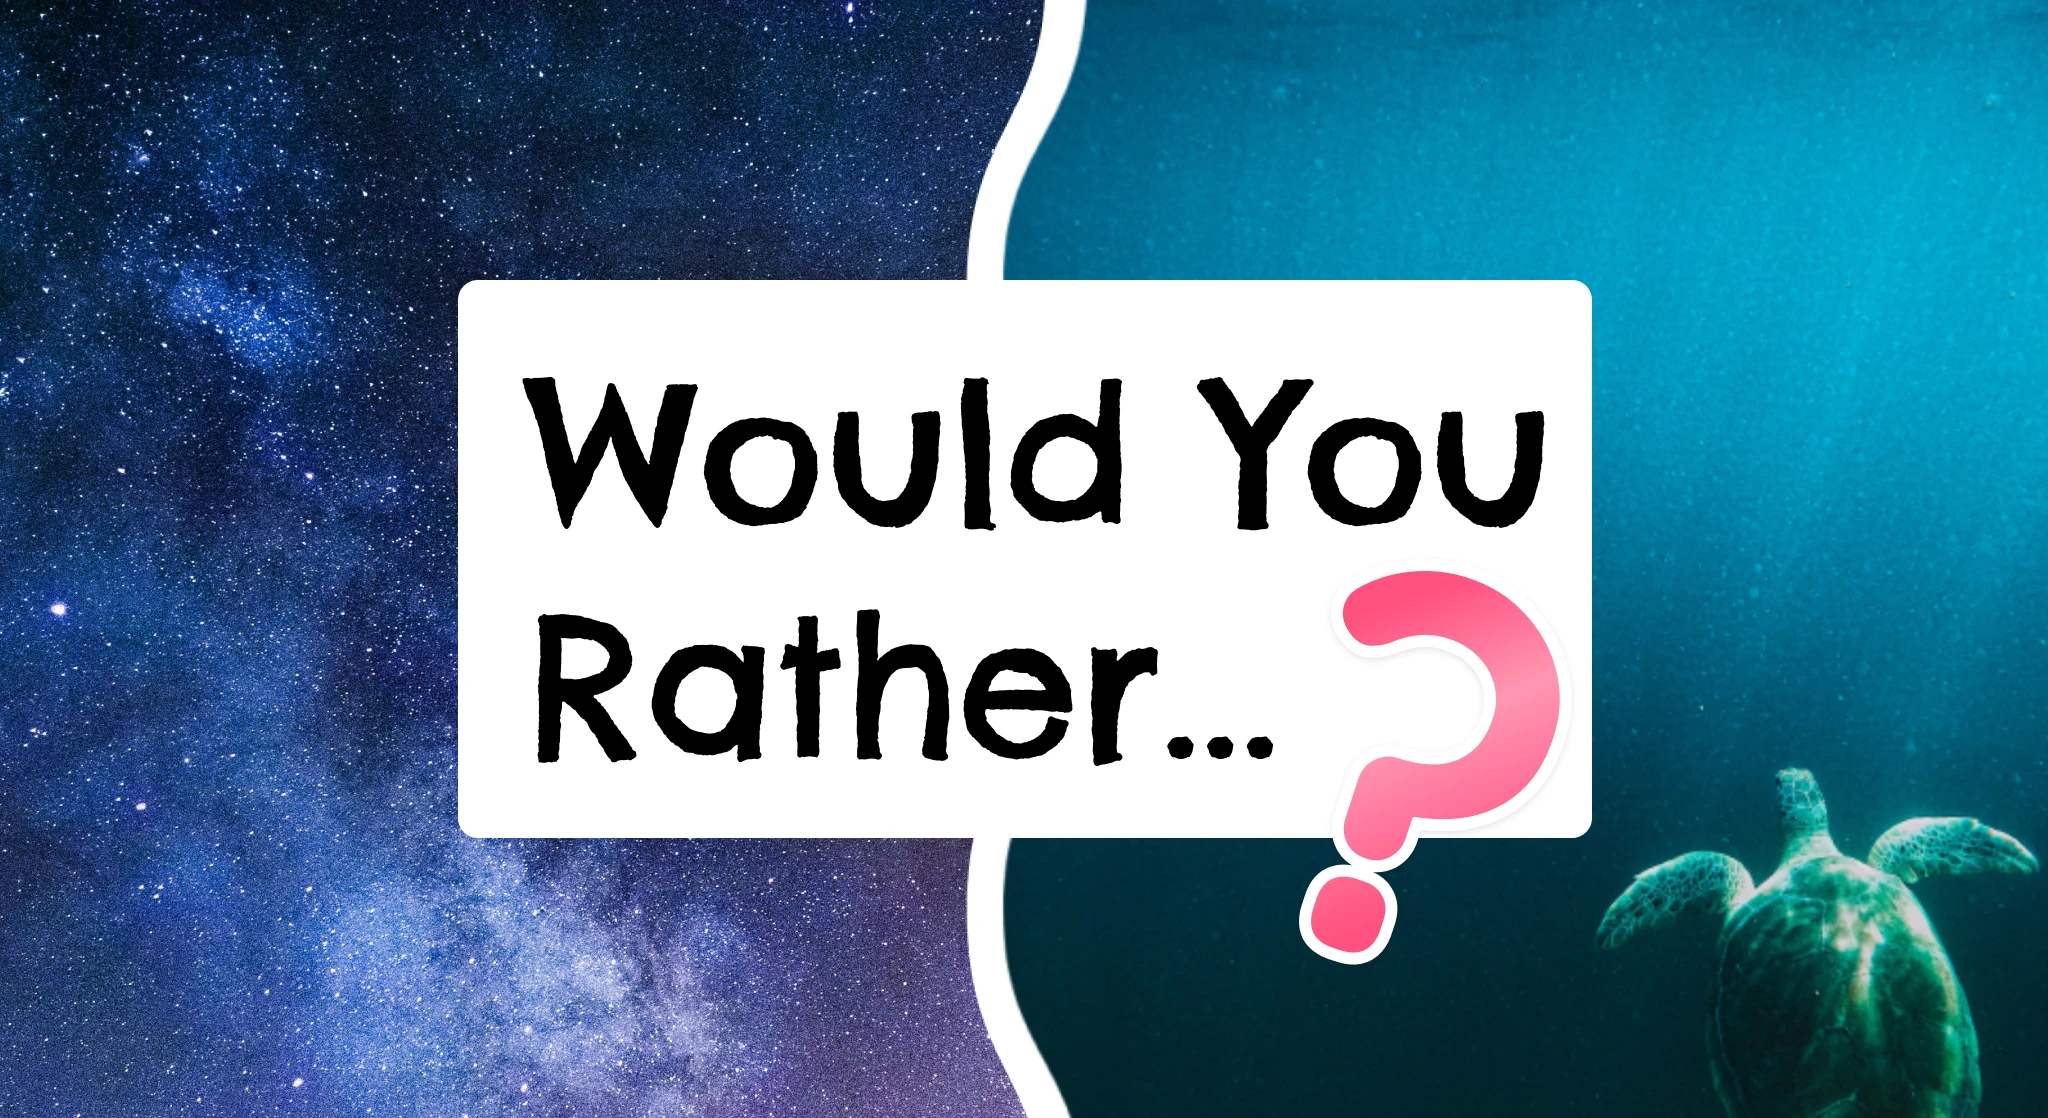 Let's play a game of Would You Rather?